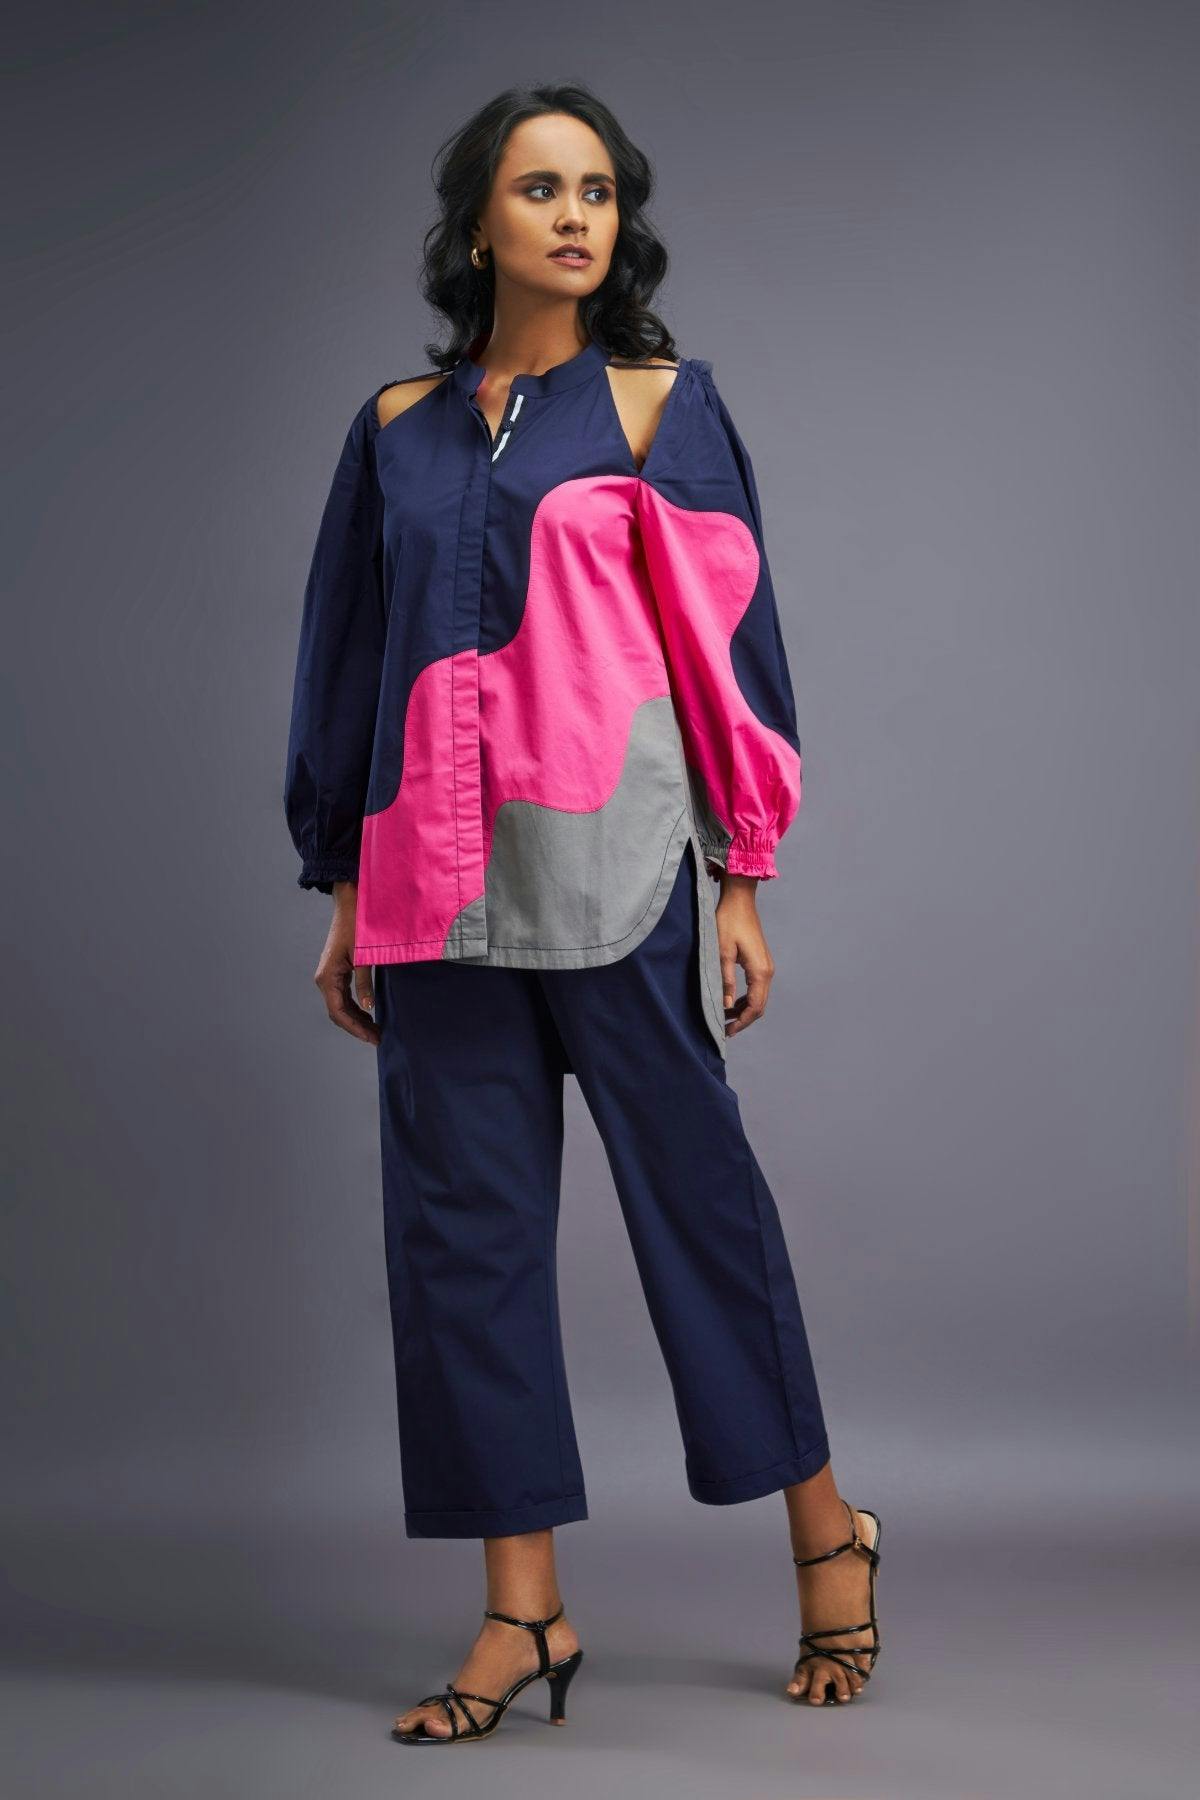 Thumbnail preview #1 for BB-1112-PG-T - Navy Blue Pink Shirt With Shoulder Cut Detail